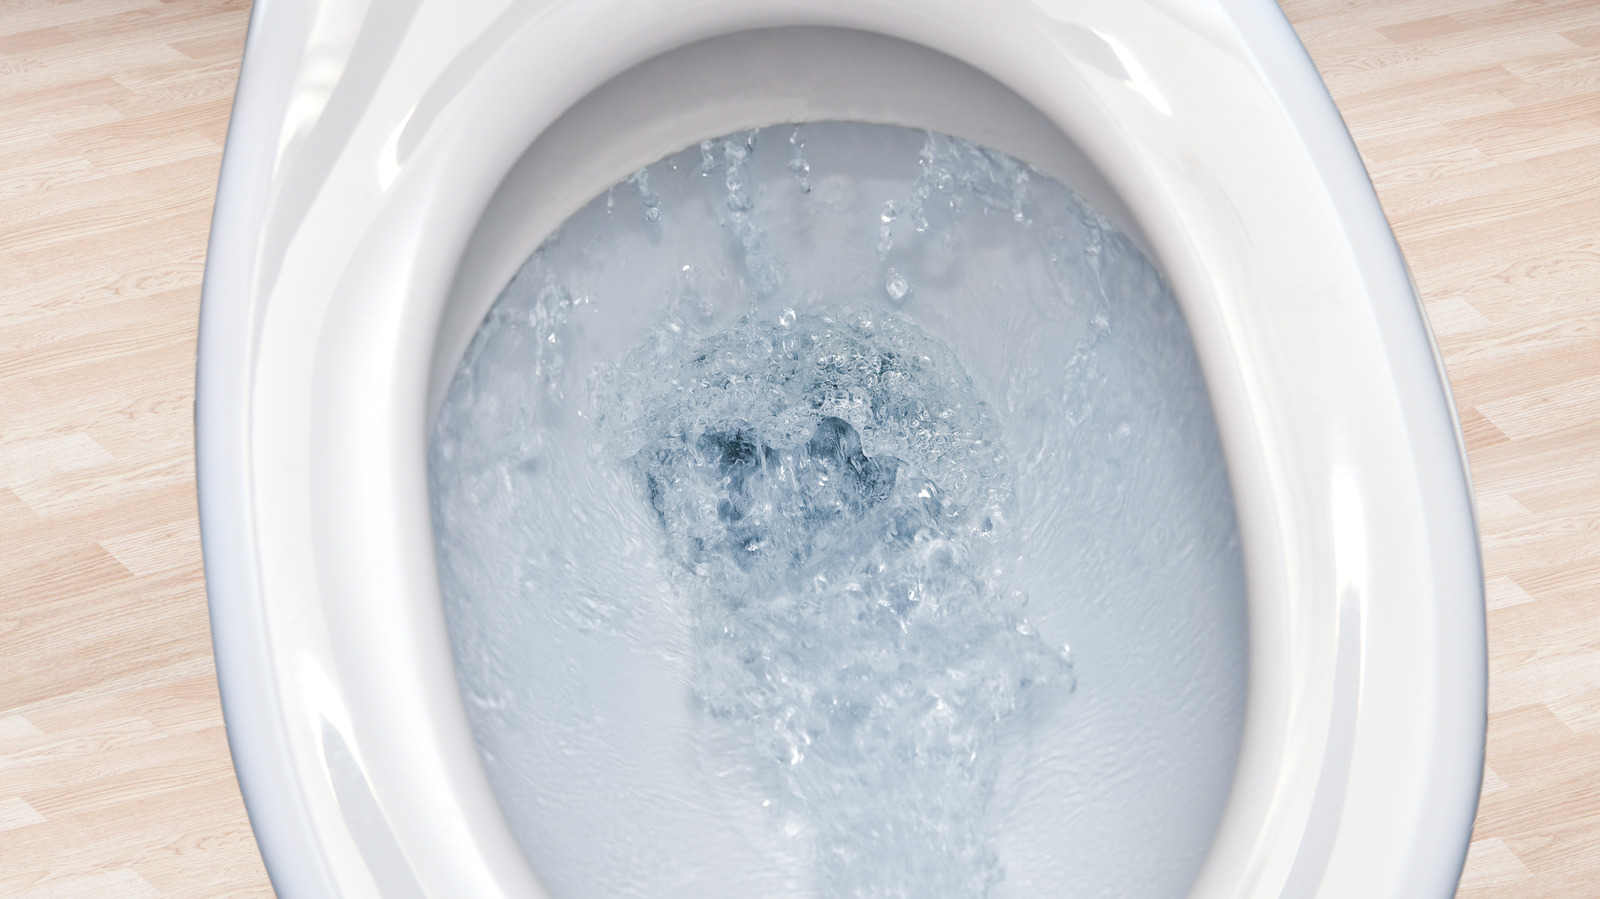 How to Clean the Rim Jets on a Toilet Bowl